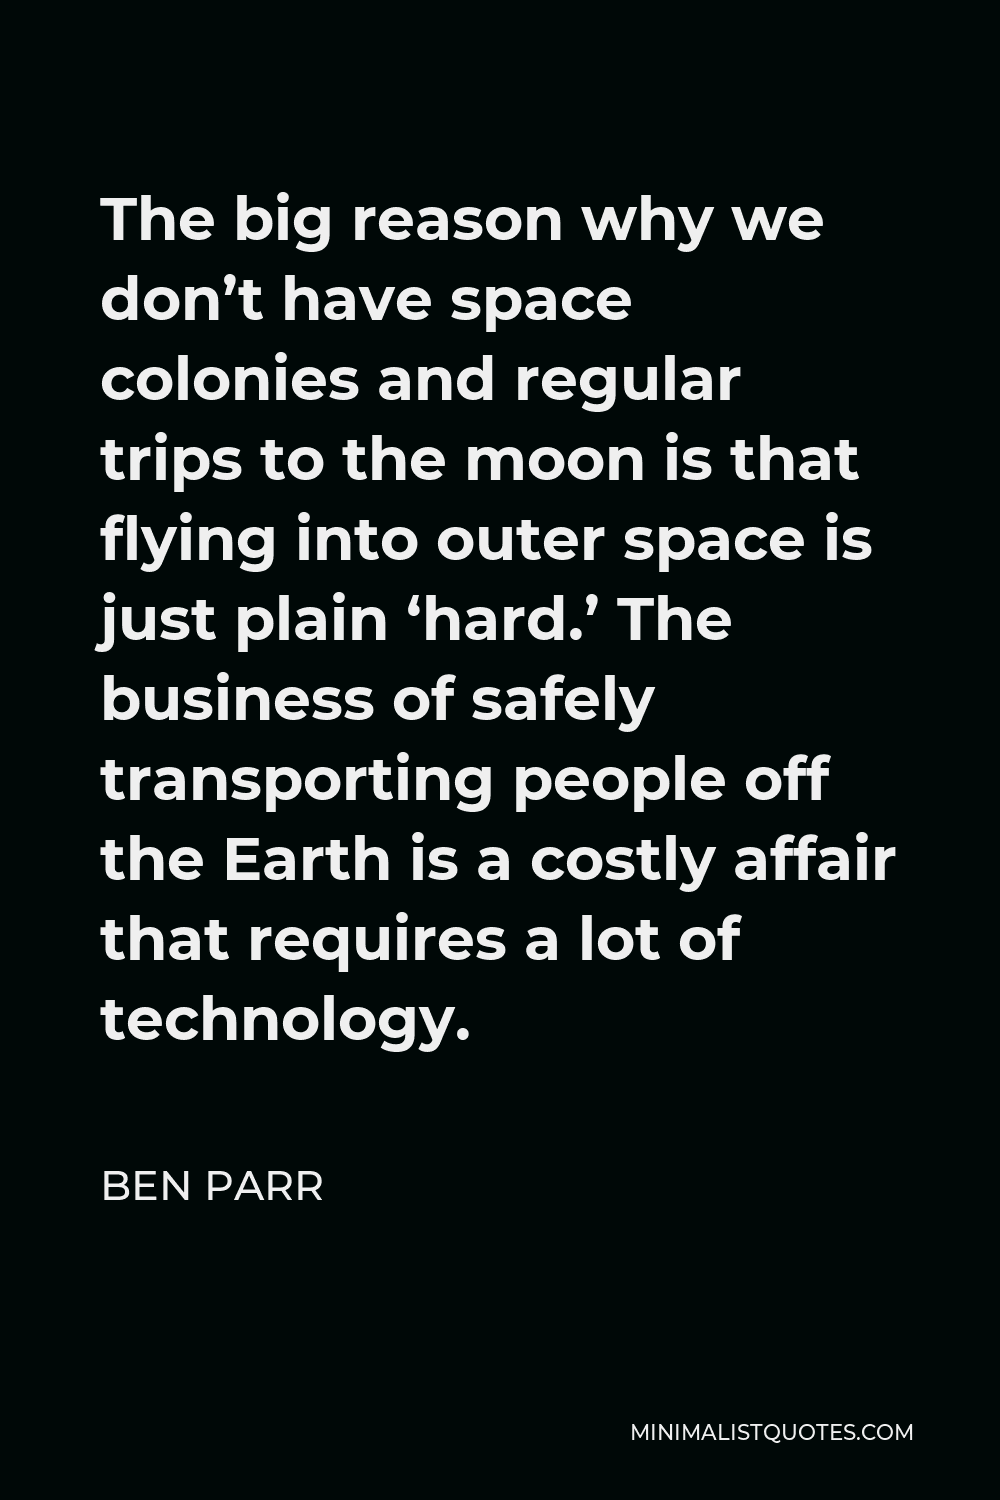 Ben Parr Quote - The big reason why we don’t have space colonies and regular trips to the moon is that flying into outer space is just plain ‘hard.’ The business of safely transporting people off the Earth is a costly affair that requires a lot of technology.